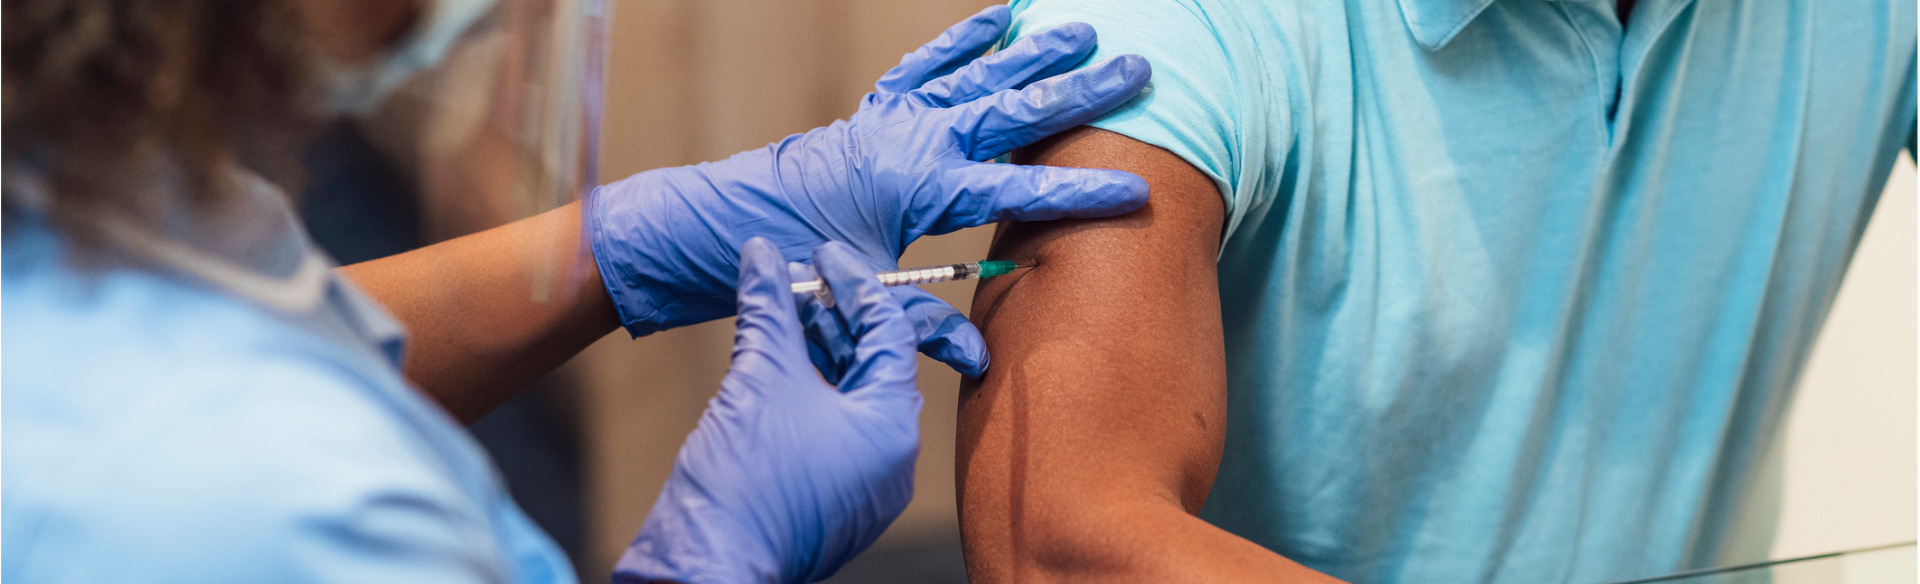 medical professional administering a vaccine